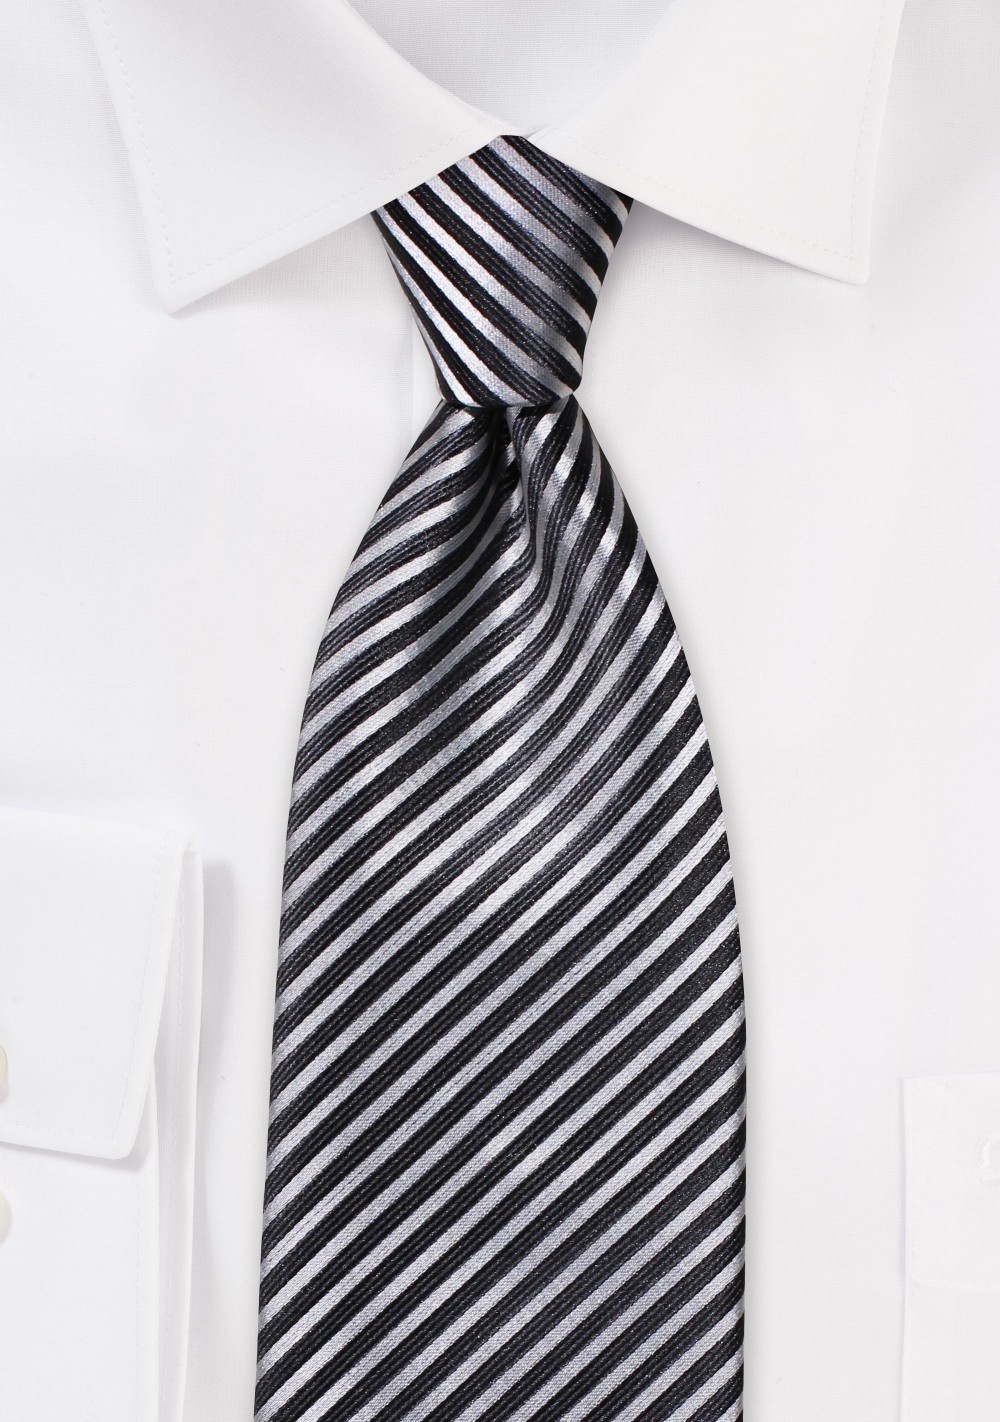 Charcoal and Gray Striped Tie